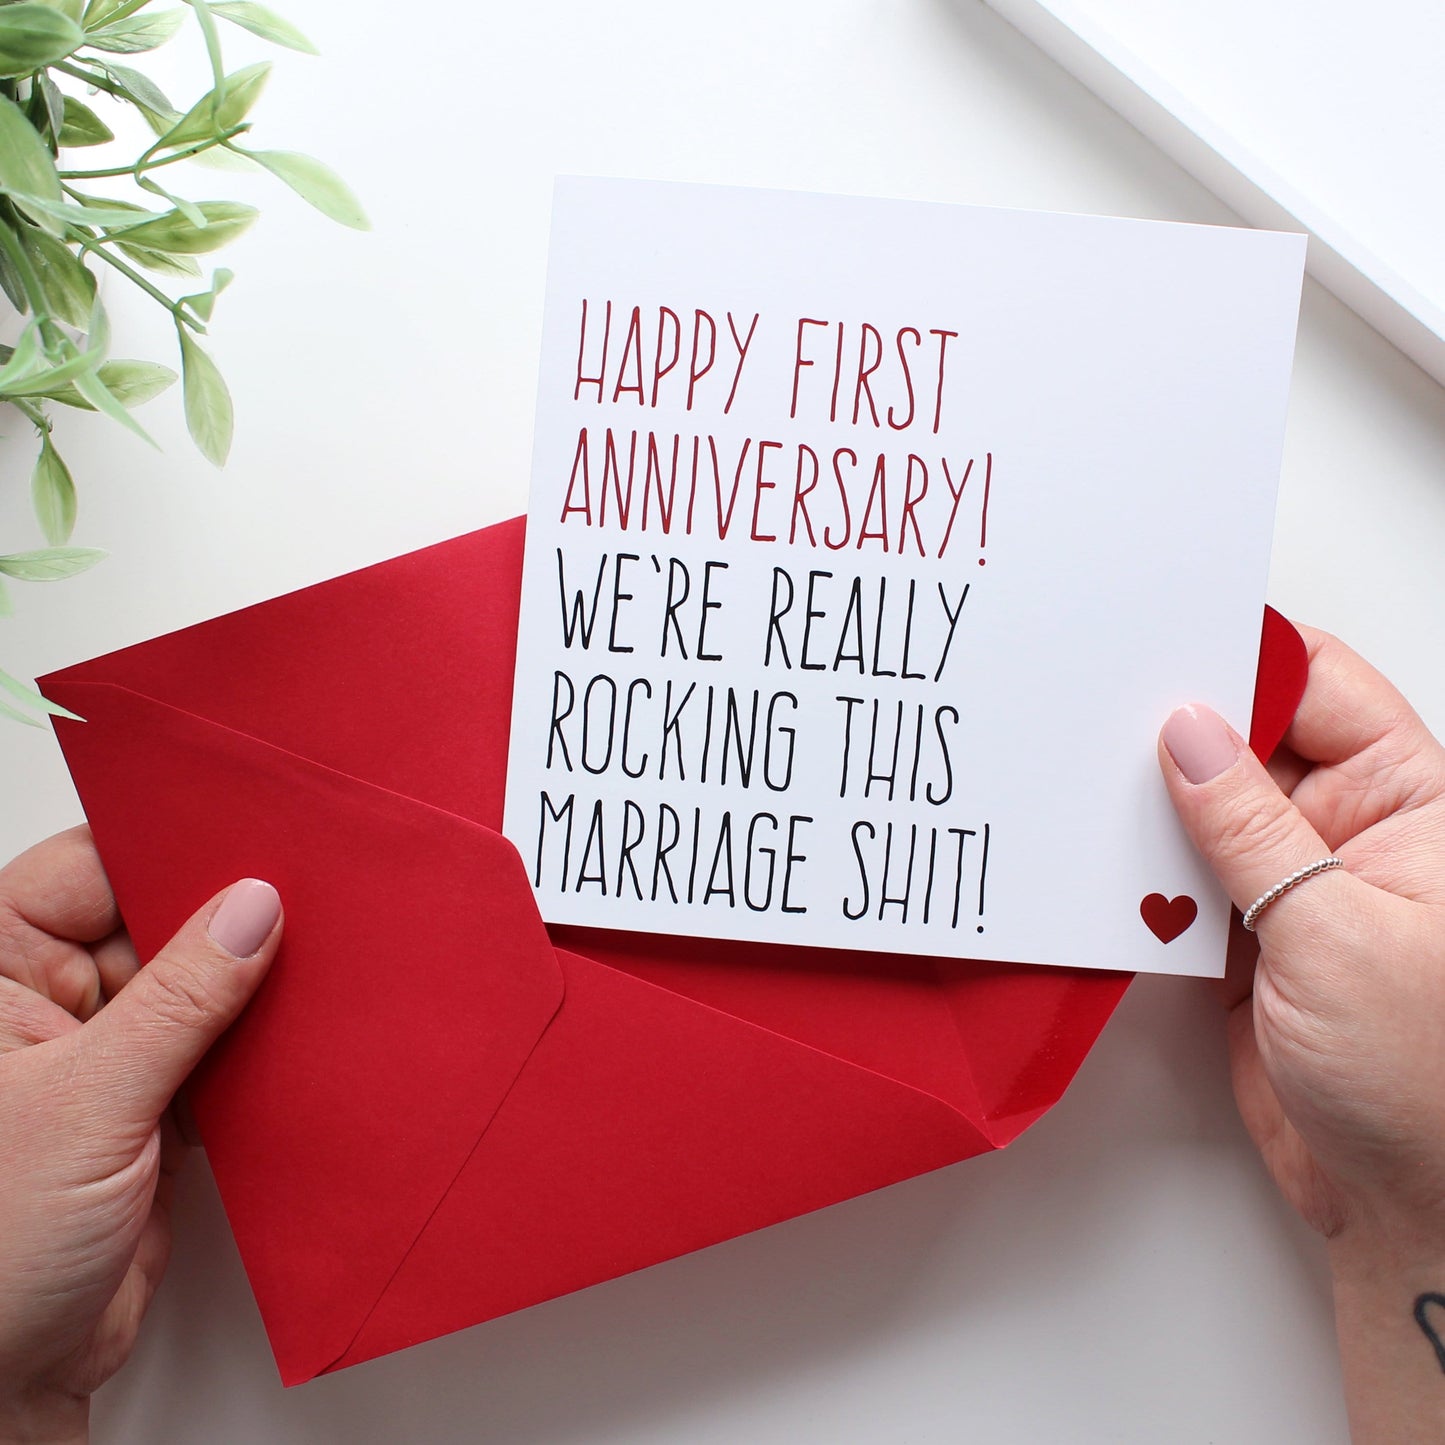 Rocking this marriage shit first anniversary card from Purple Tree Designs